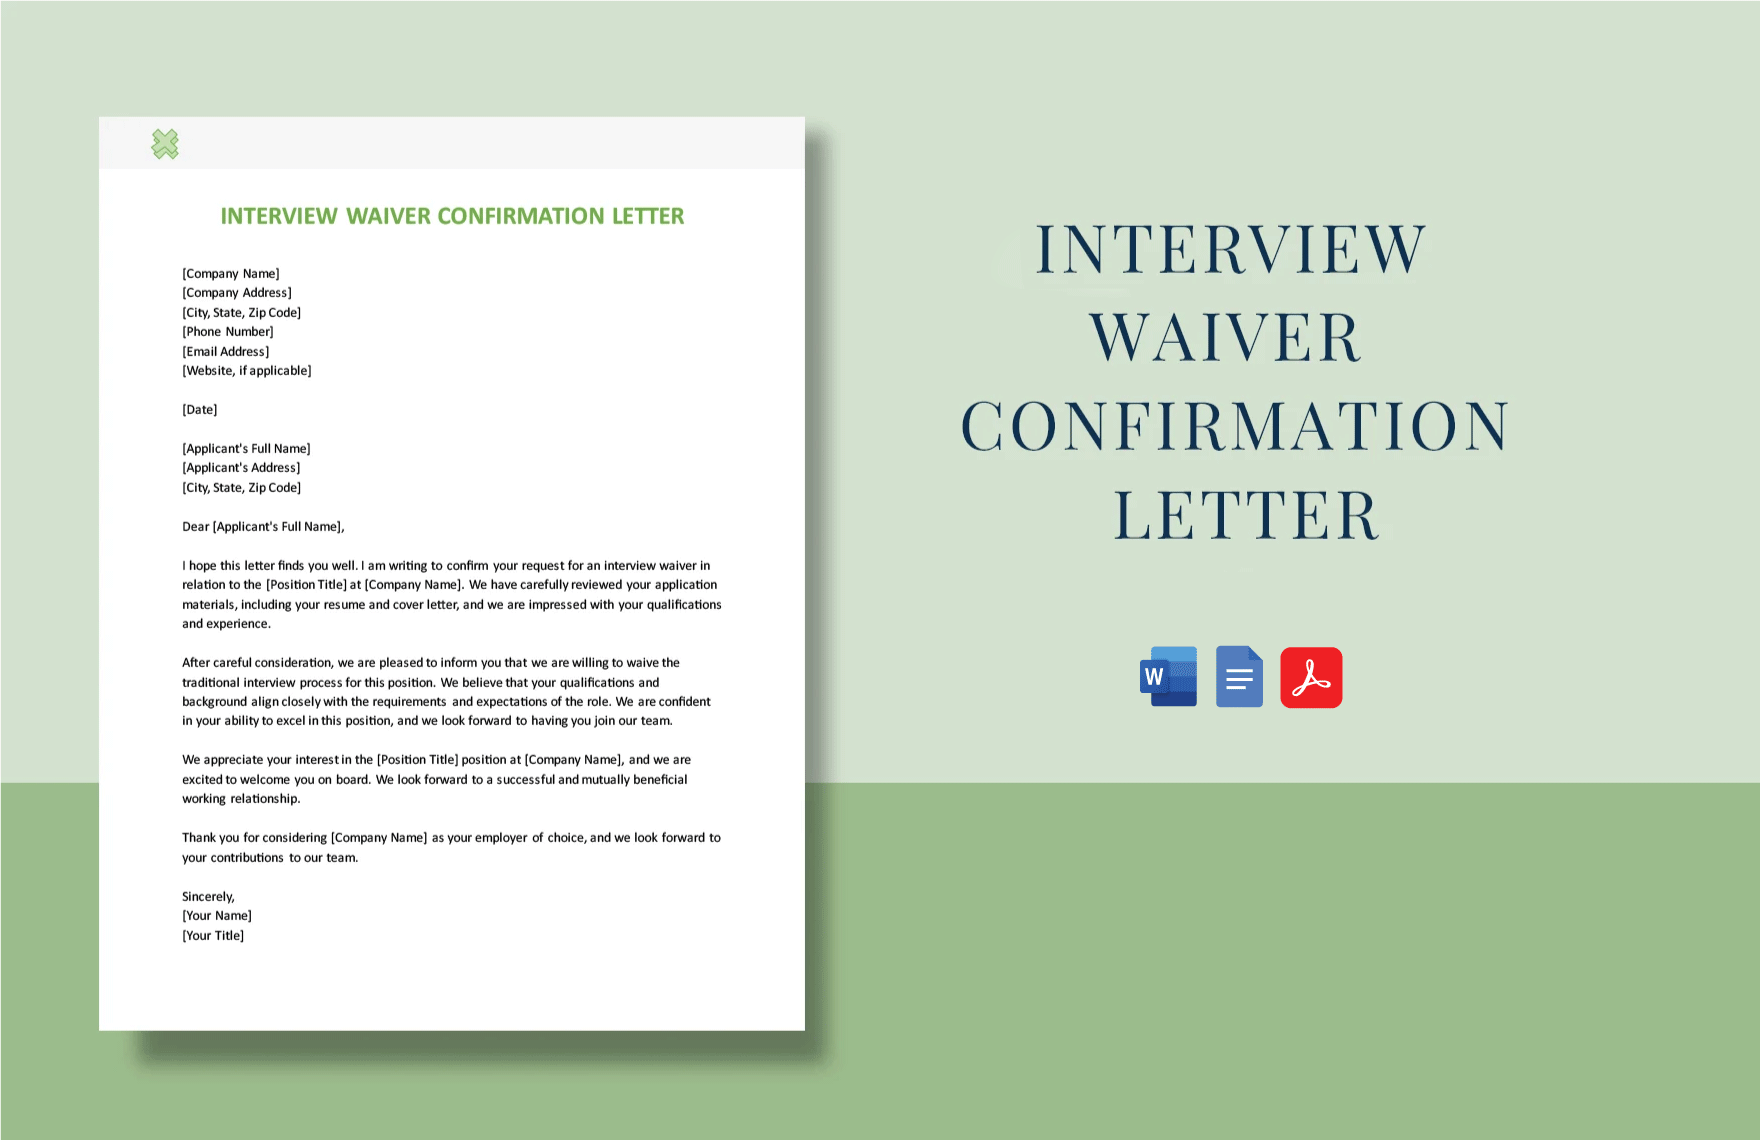 Interview Waiver Confirmation Letter